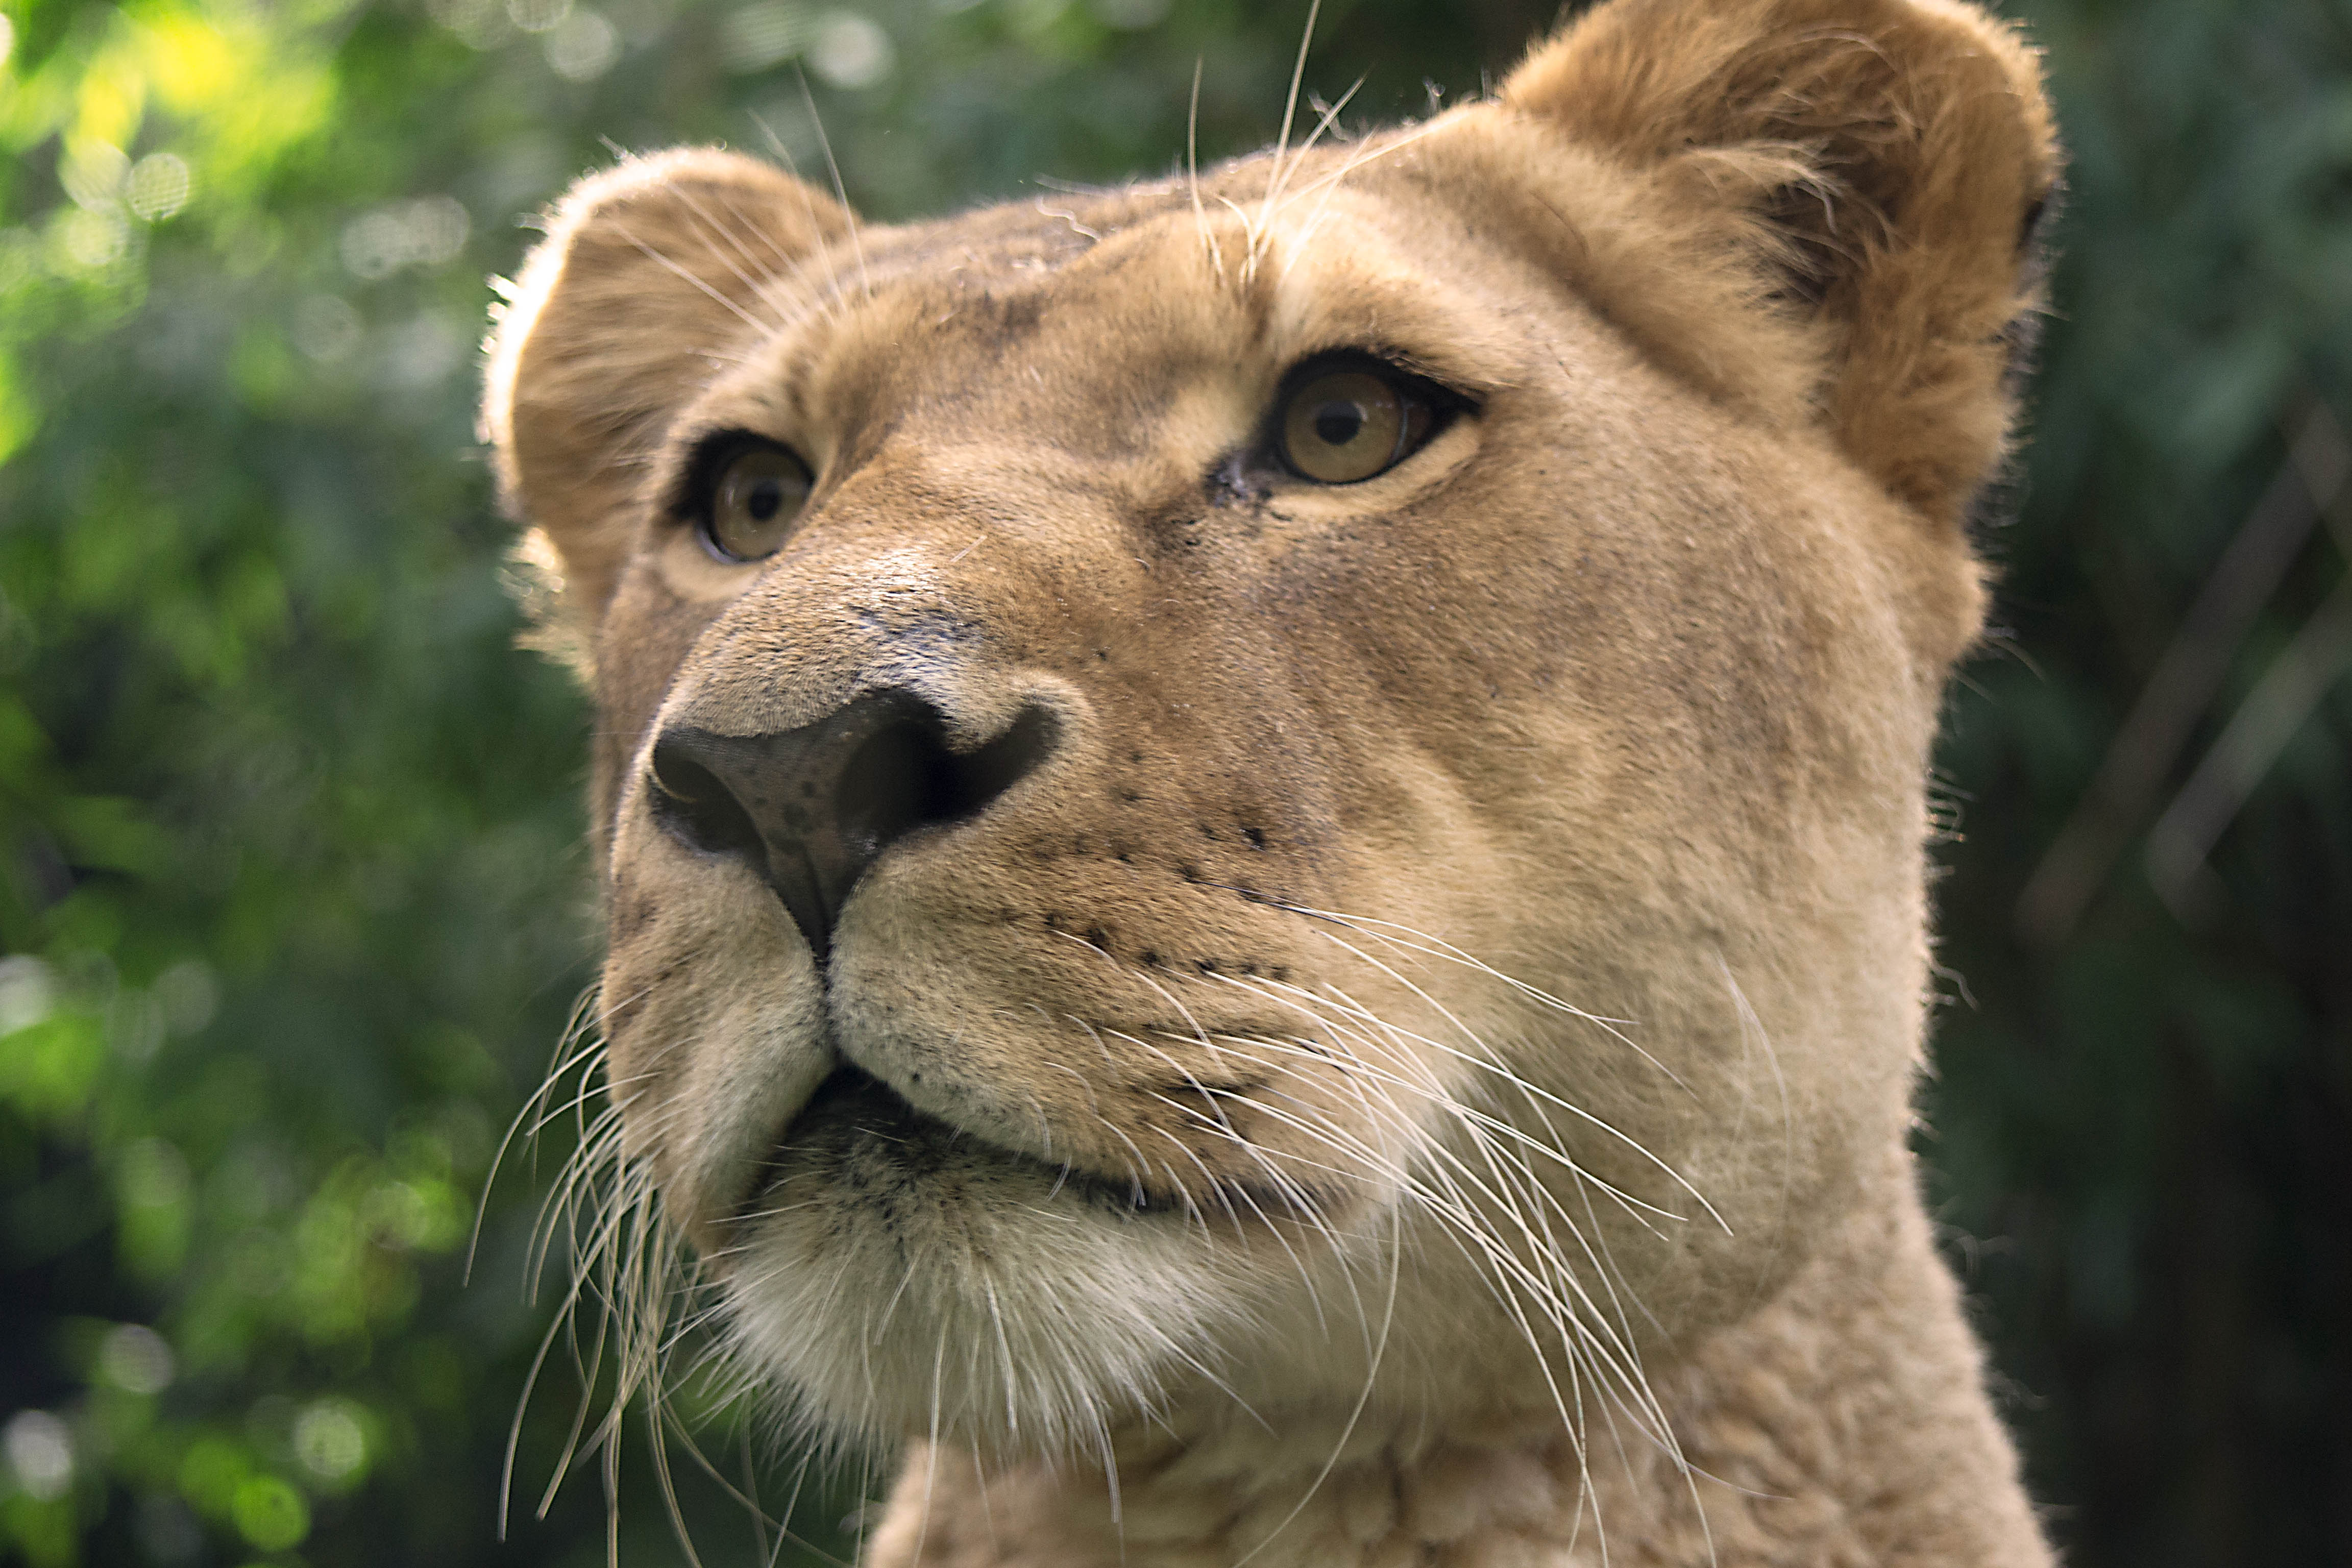 A close-up of a lioness`s face